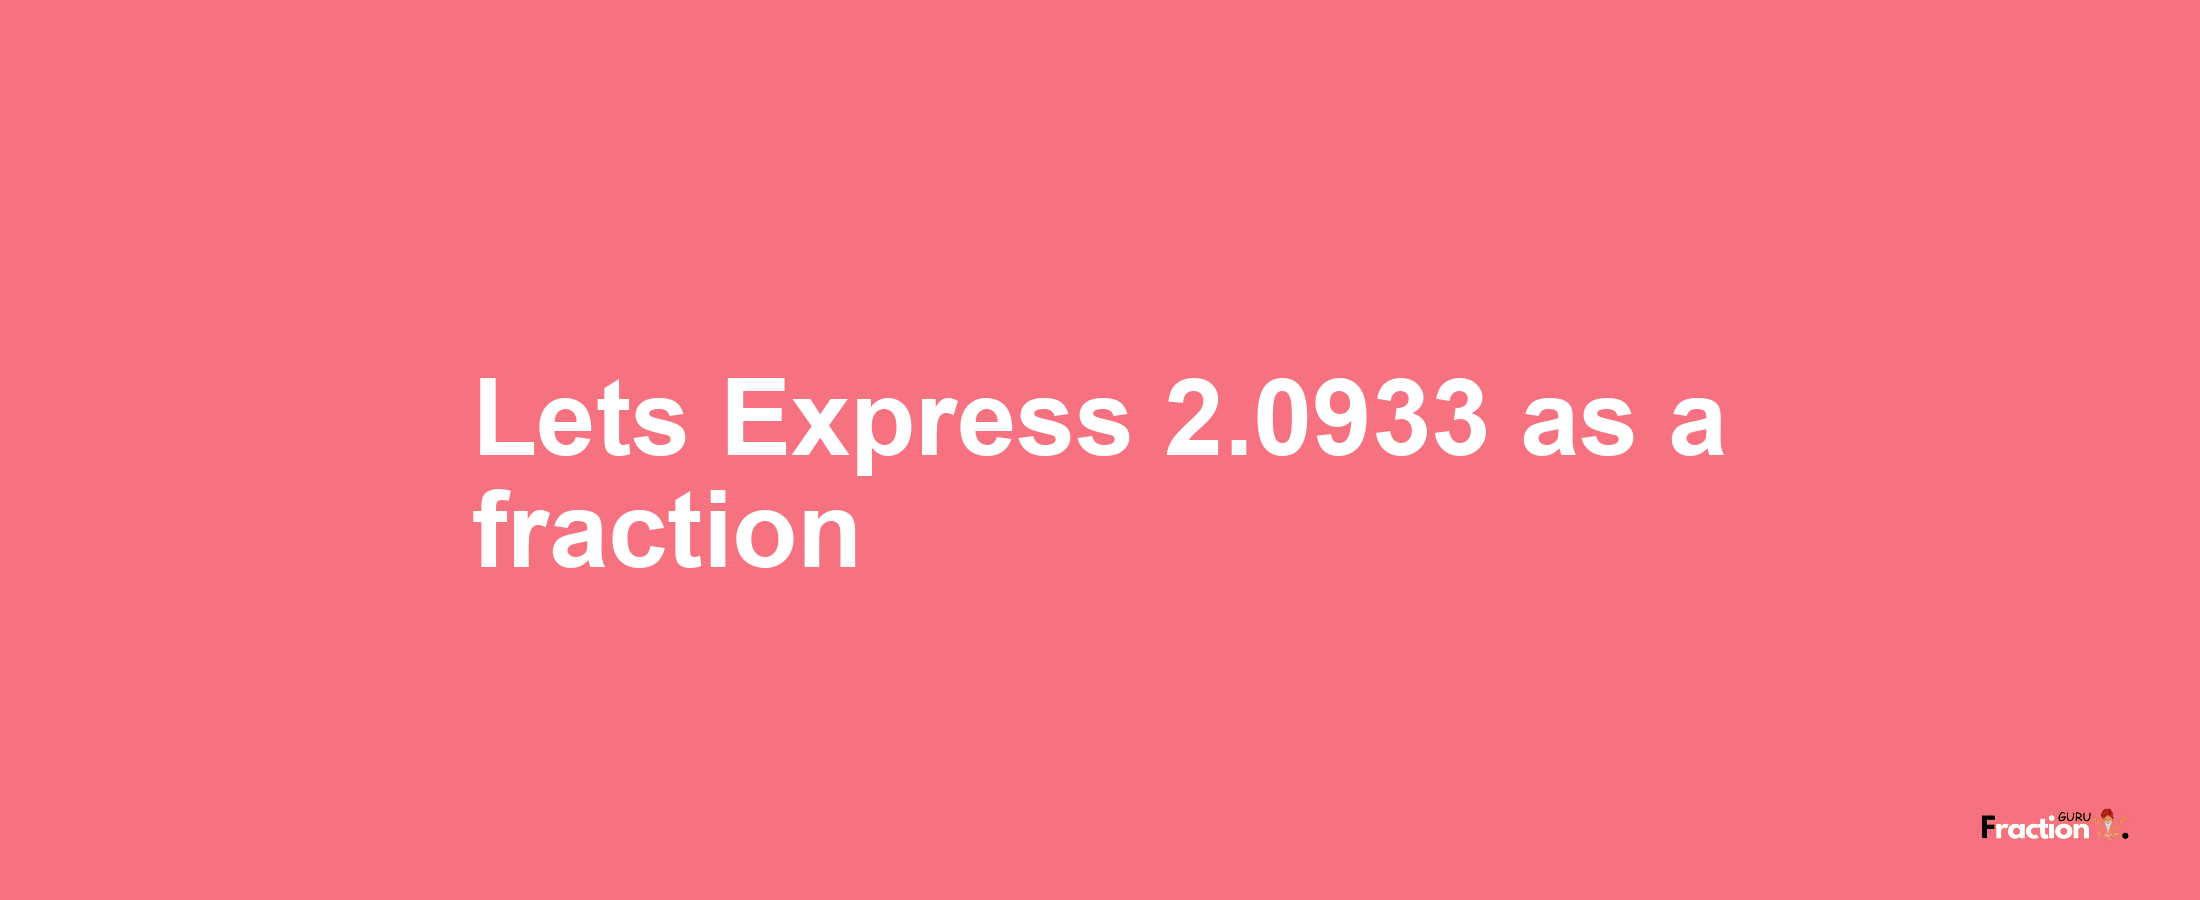 Lets Express 2.0933 as afraction